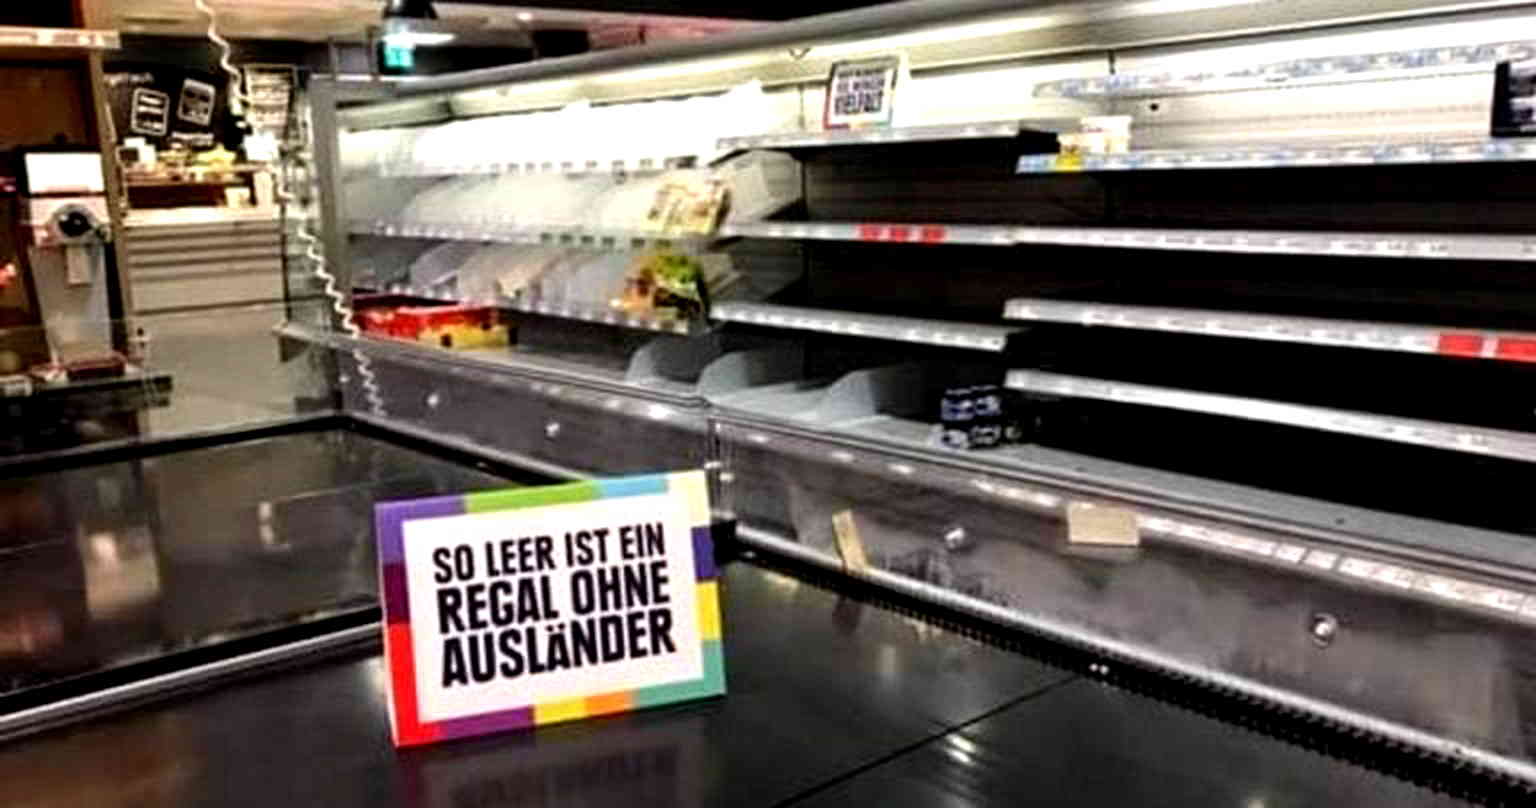 German Market Removes All Foreign-Made Items to Prove a Point About Racism